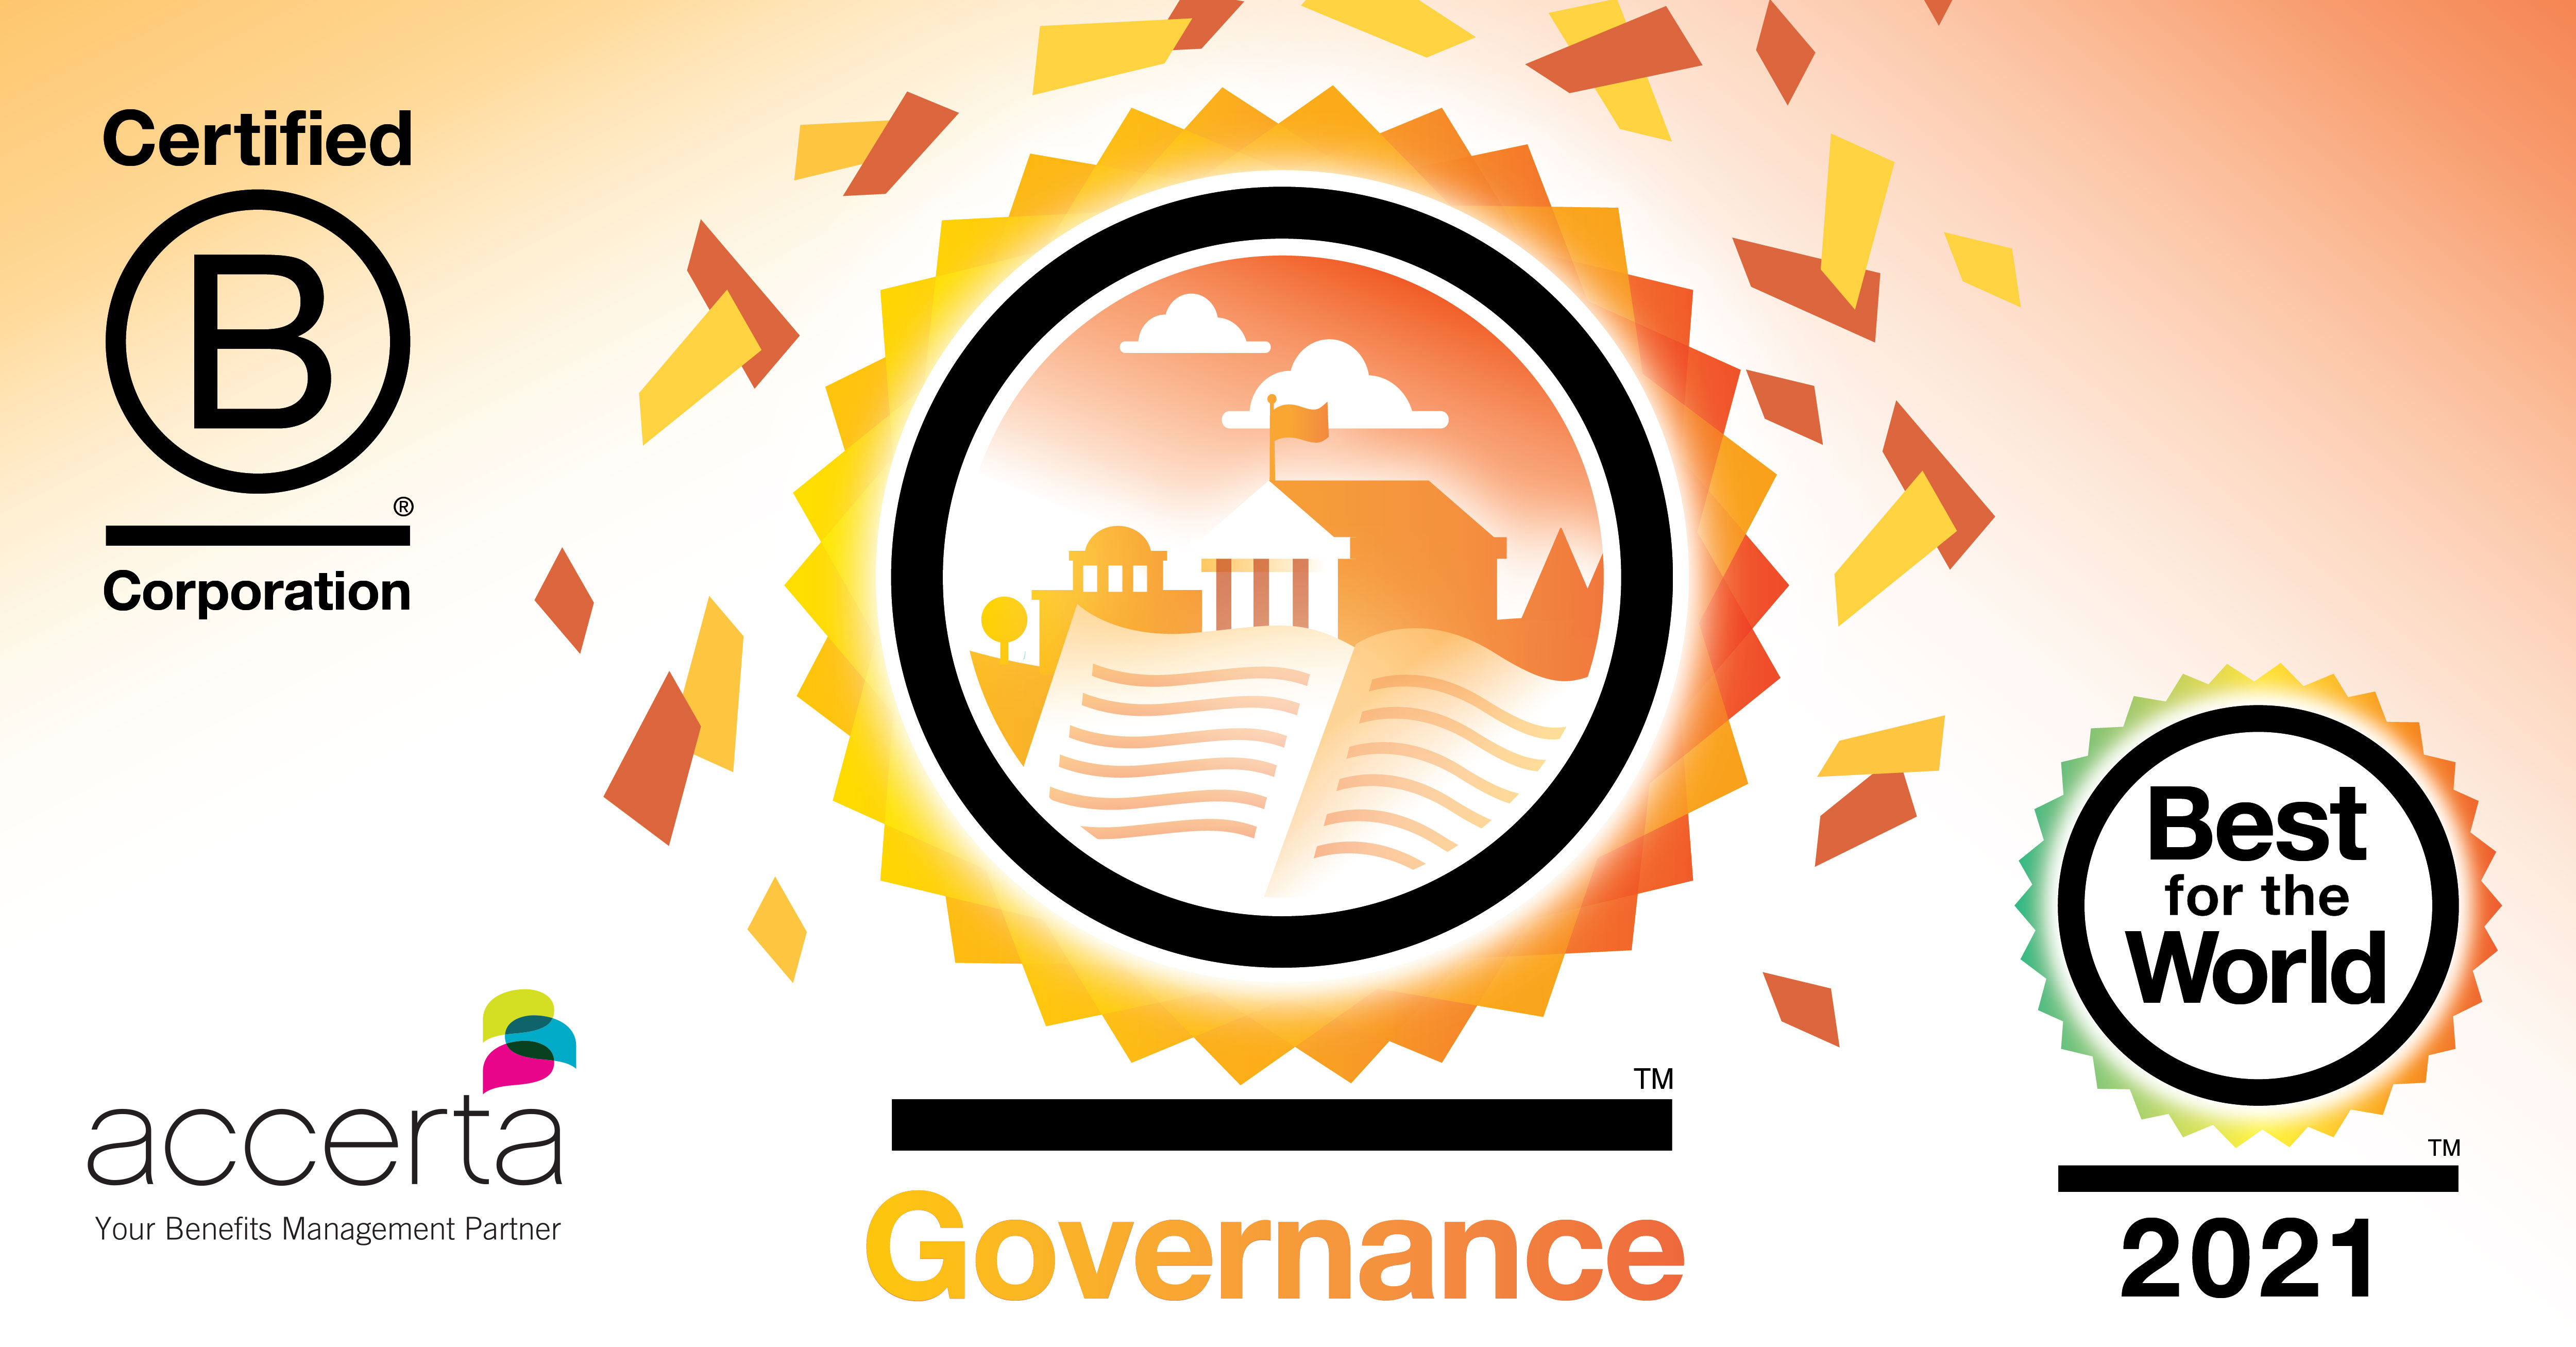 BCorp image Governance